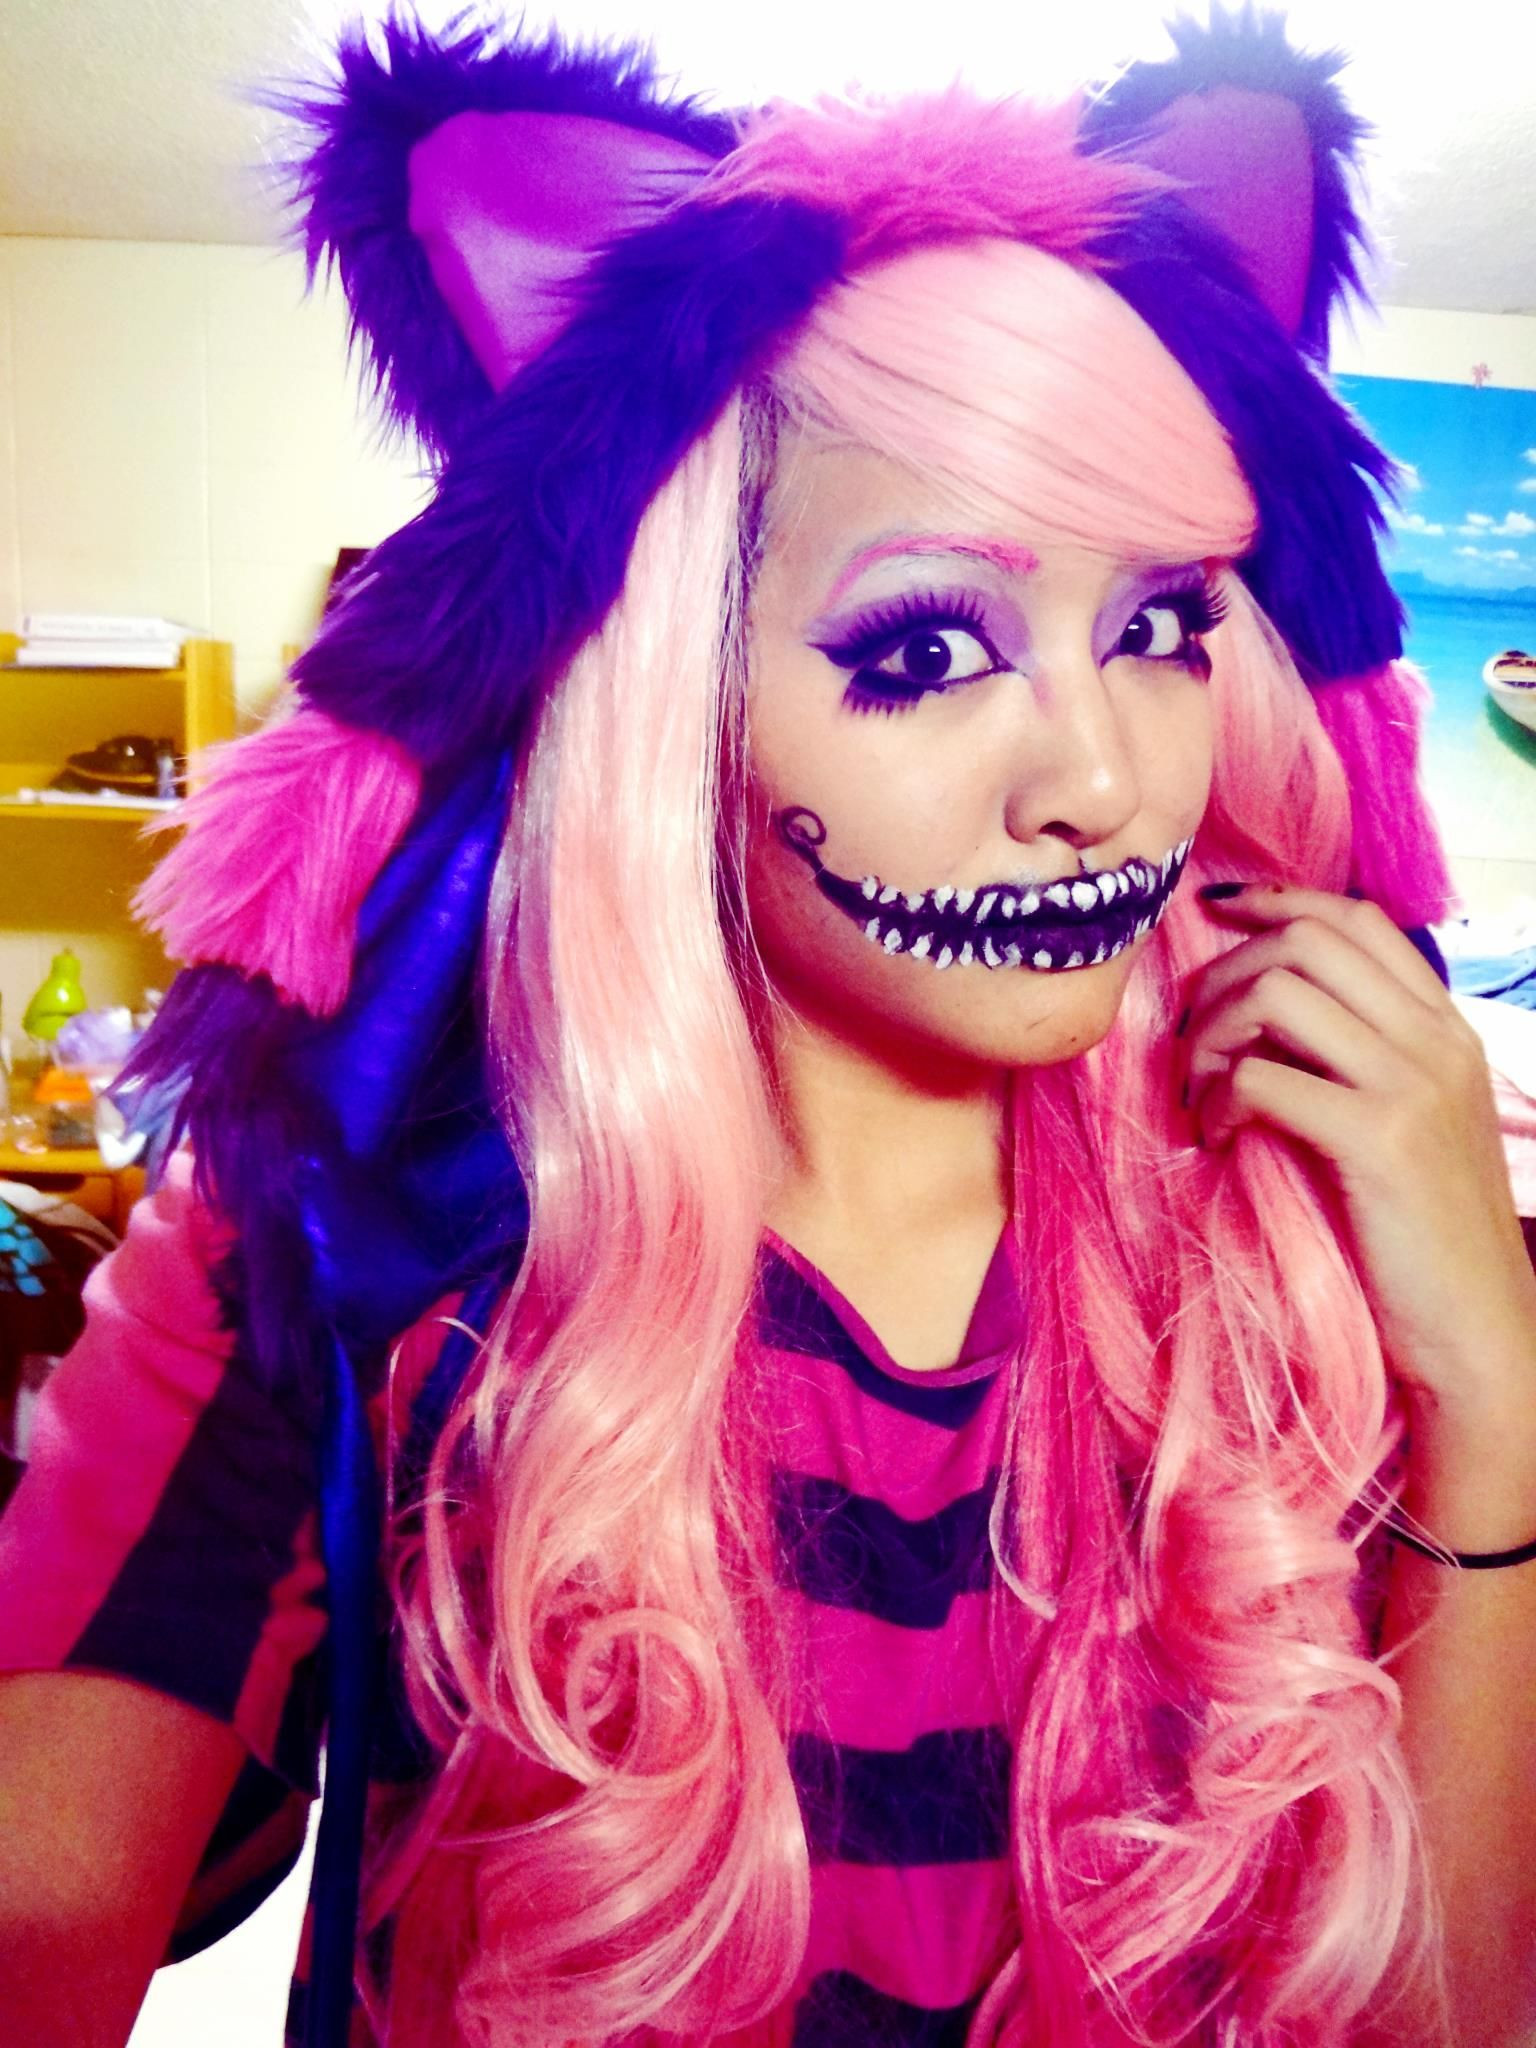 DIY Cheshire Cat Costume
 My Cheshire Cat costume from last year If you want to try